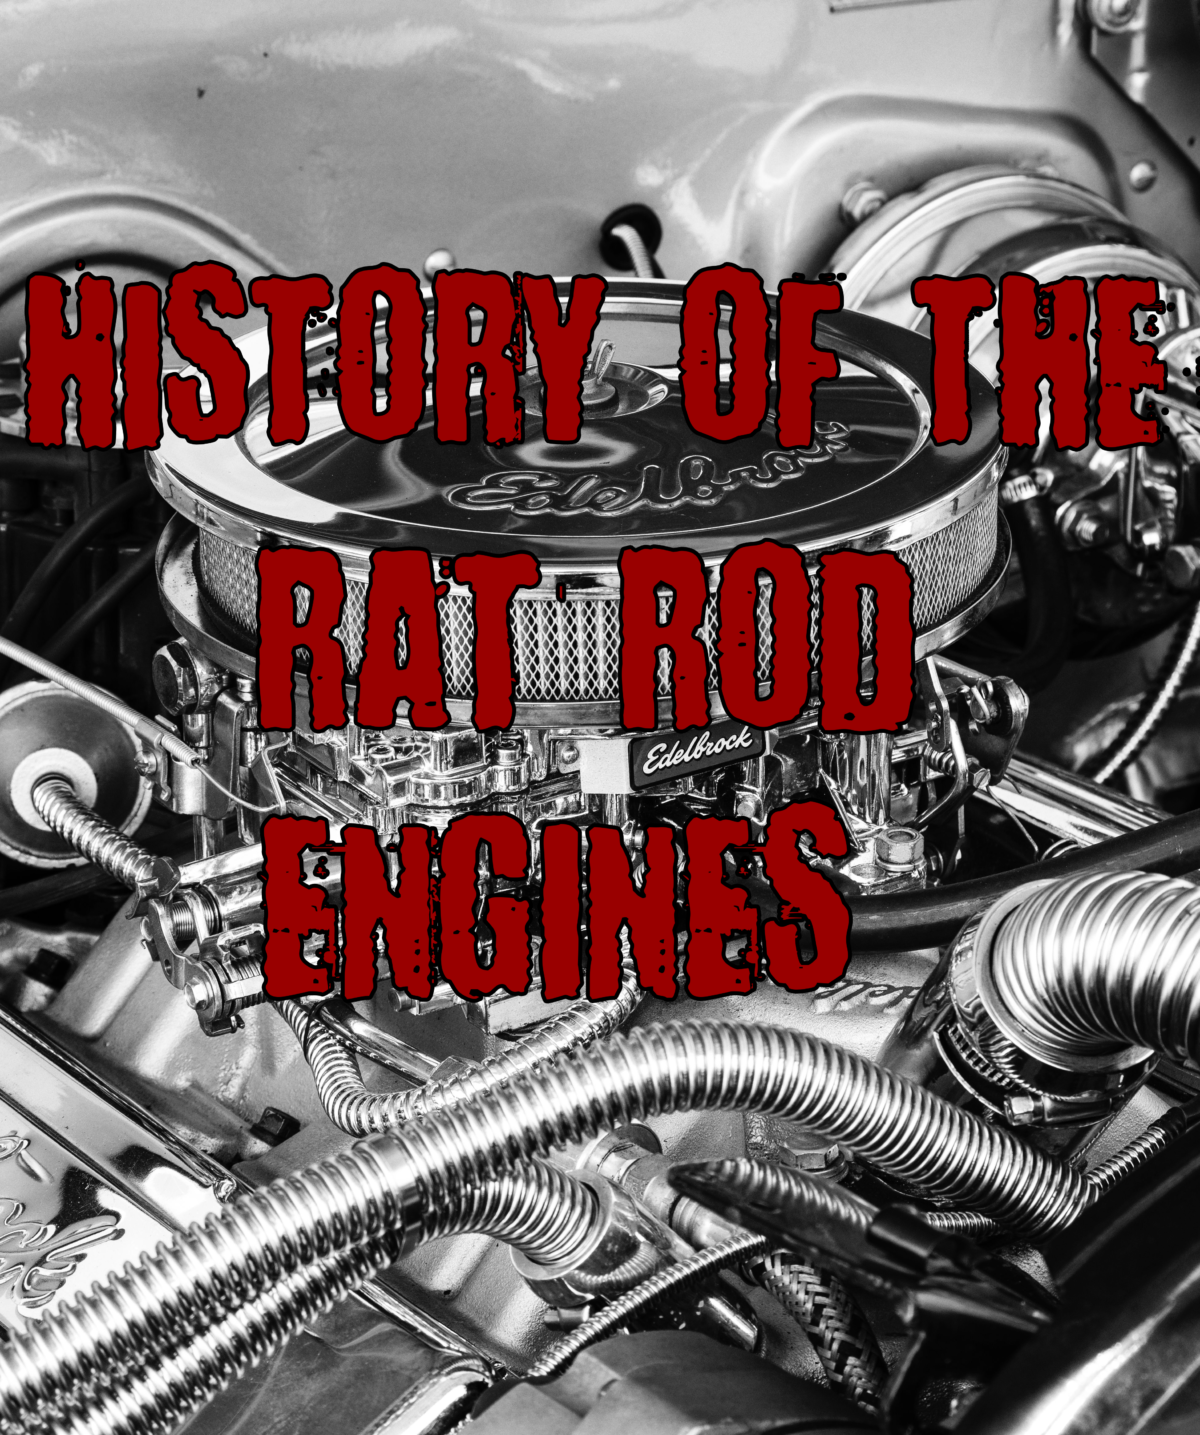 Rat Rod Engines: History Of What People Use